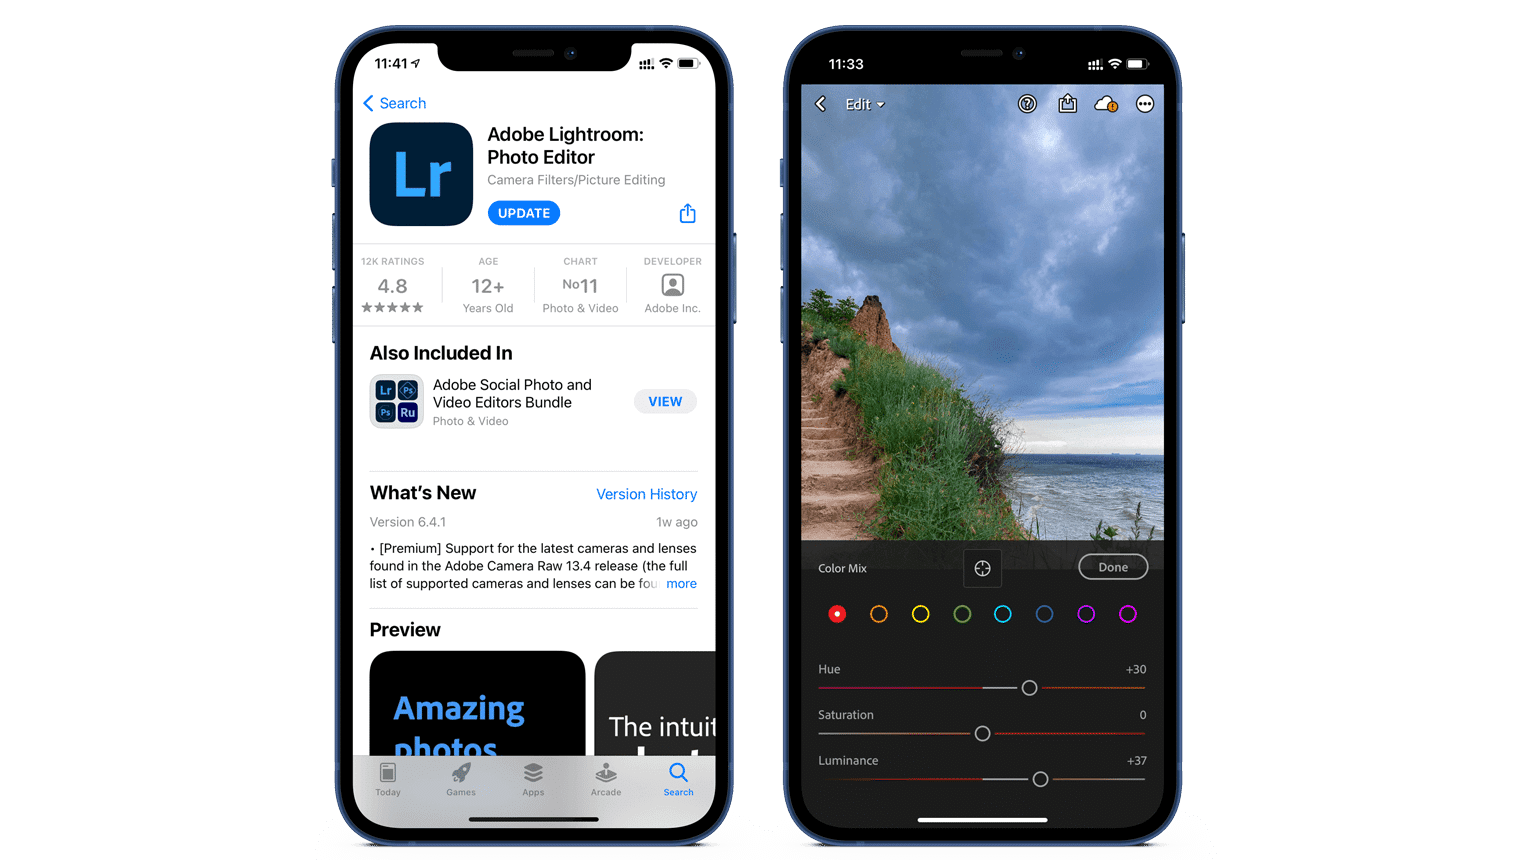 iPhone screens showing Adobe Lightroom Photo Editor in App store